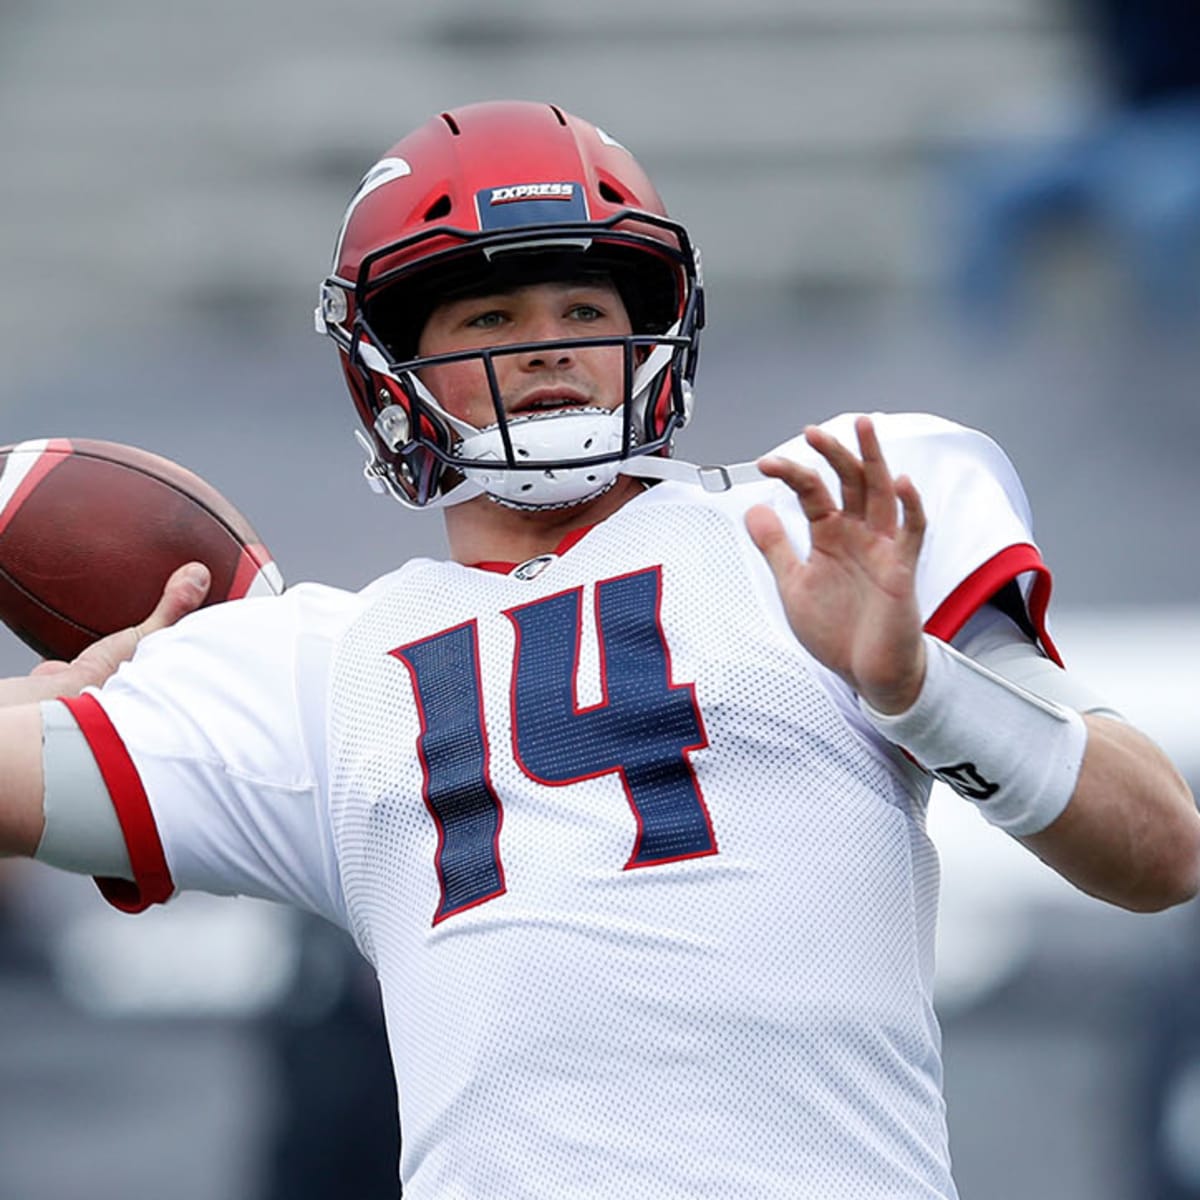 What Happened To Christian Hackenberg? (Complete Story)